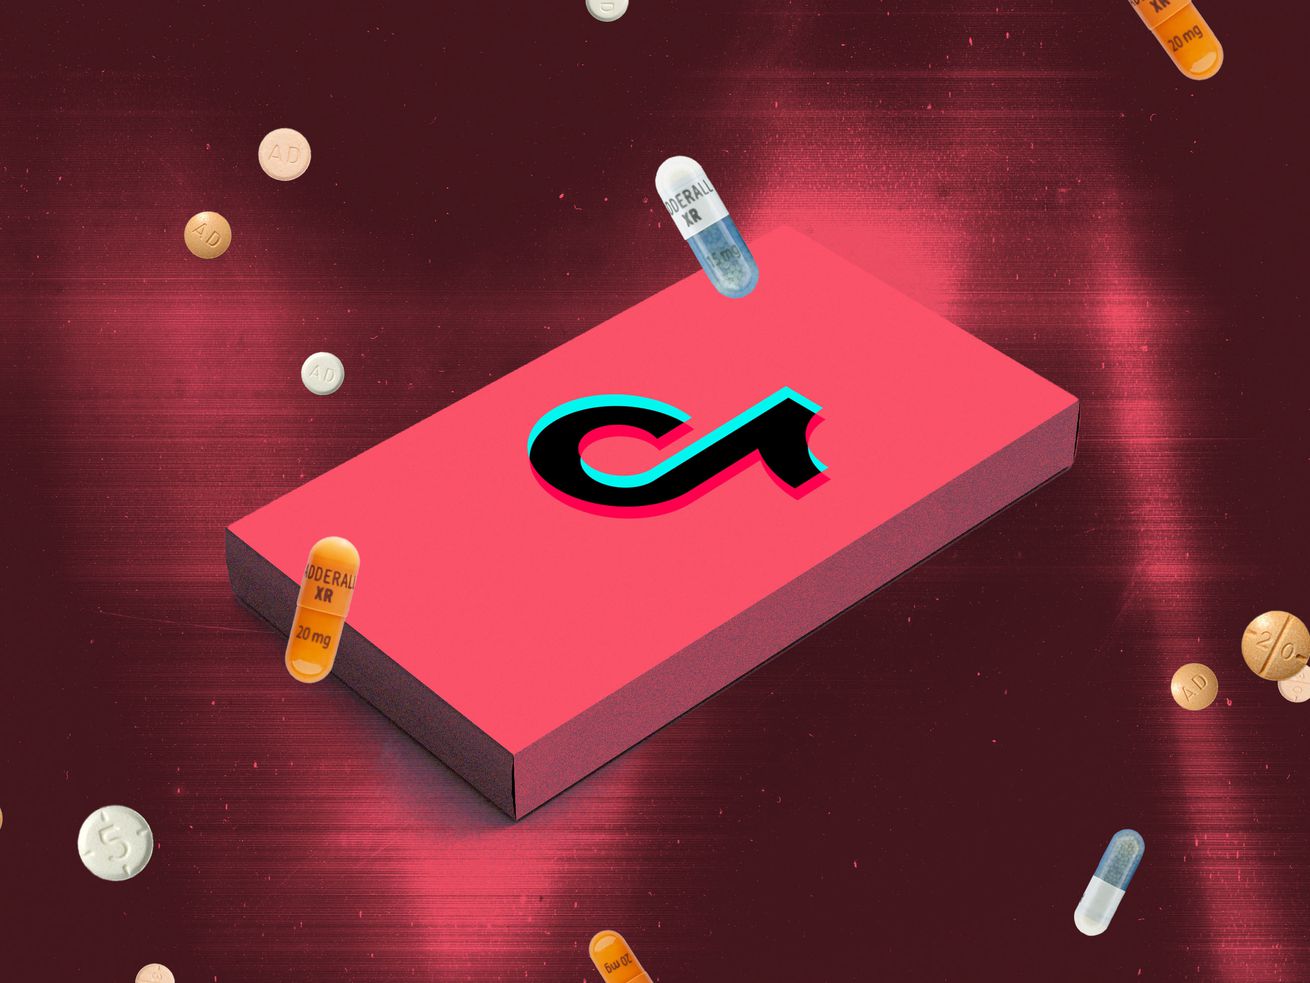 Illustration of the TikTok logo surrounded by floating pills.